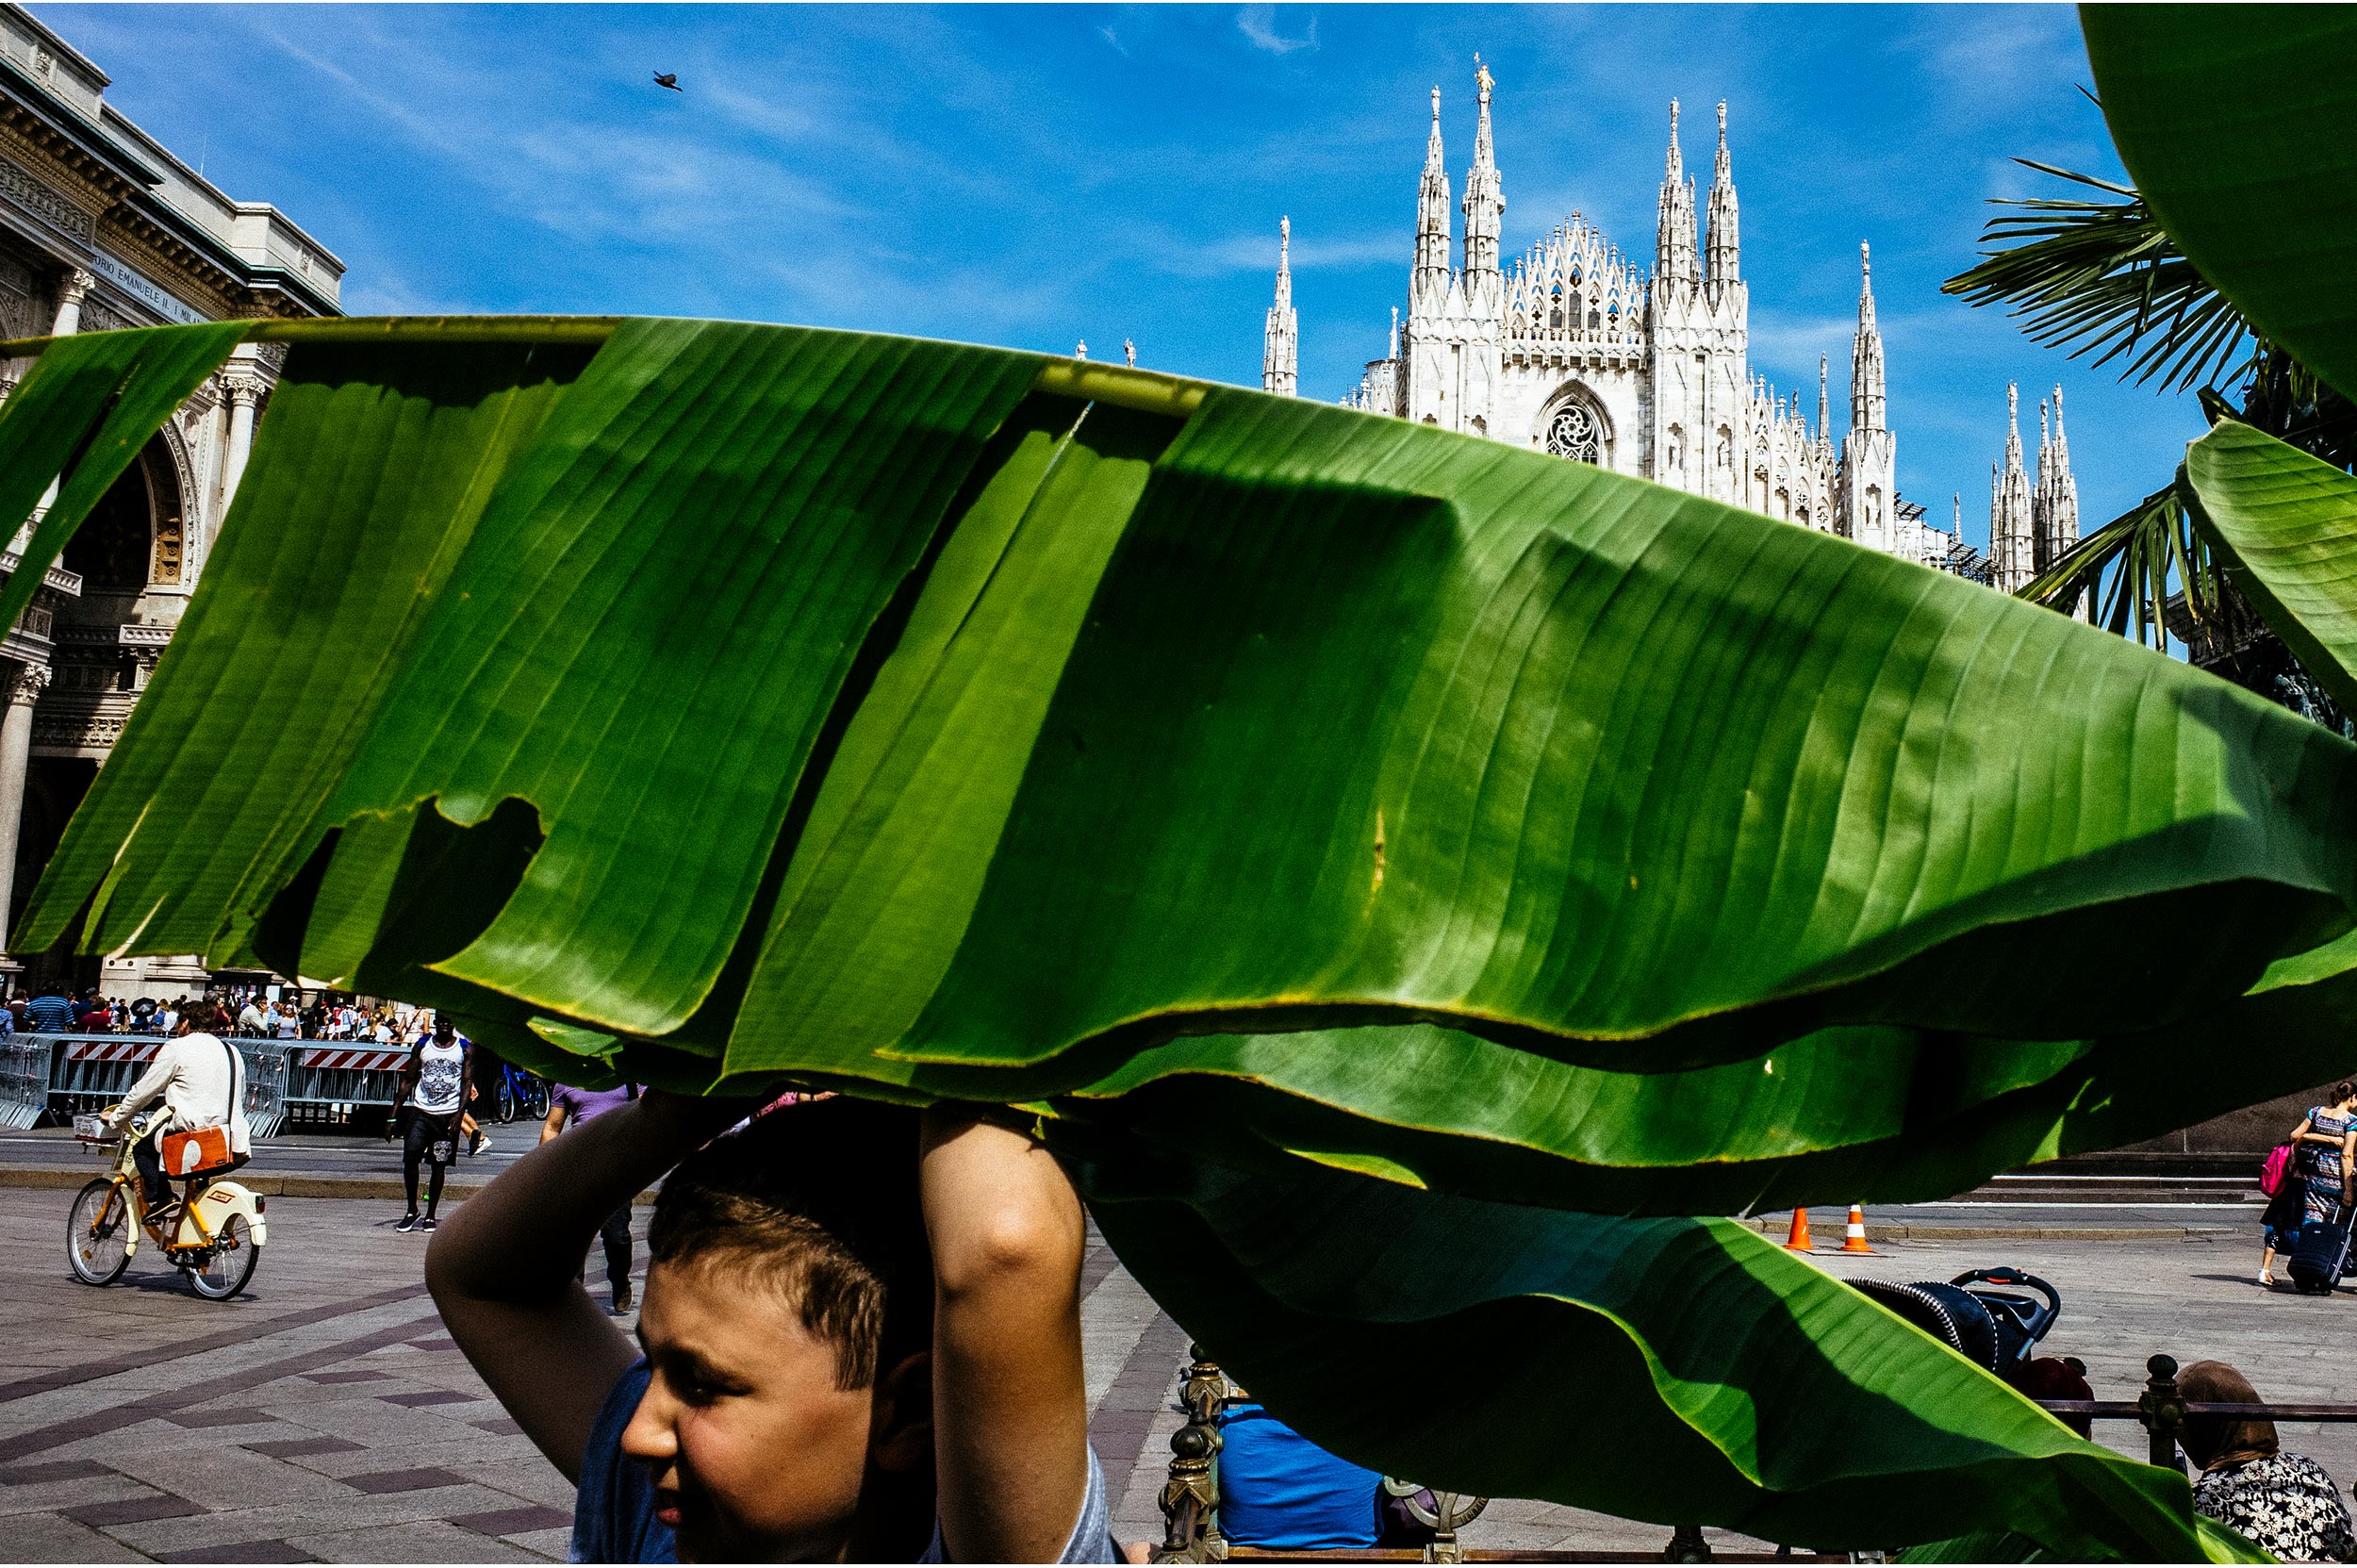 Milan, Italy, 2017. The boy, the bicyle, the palm tree and the Cathedral.